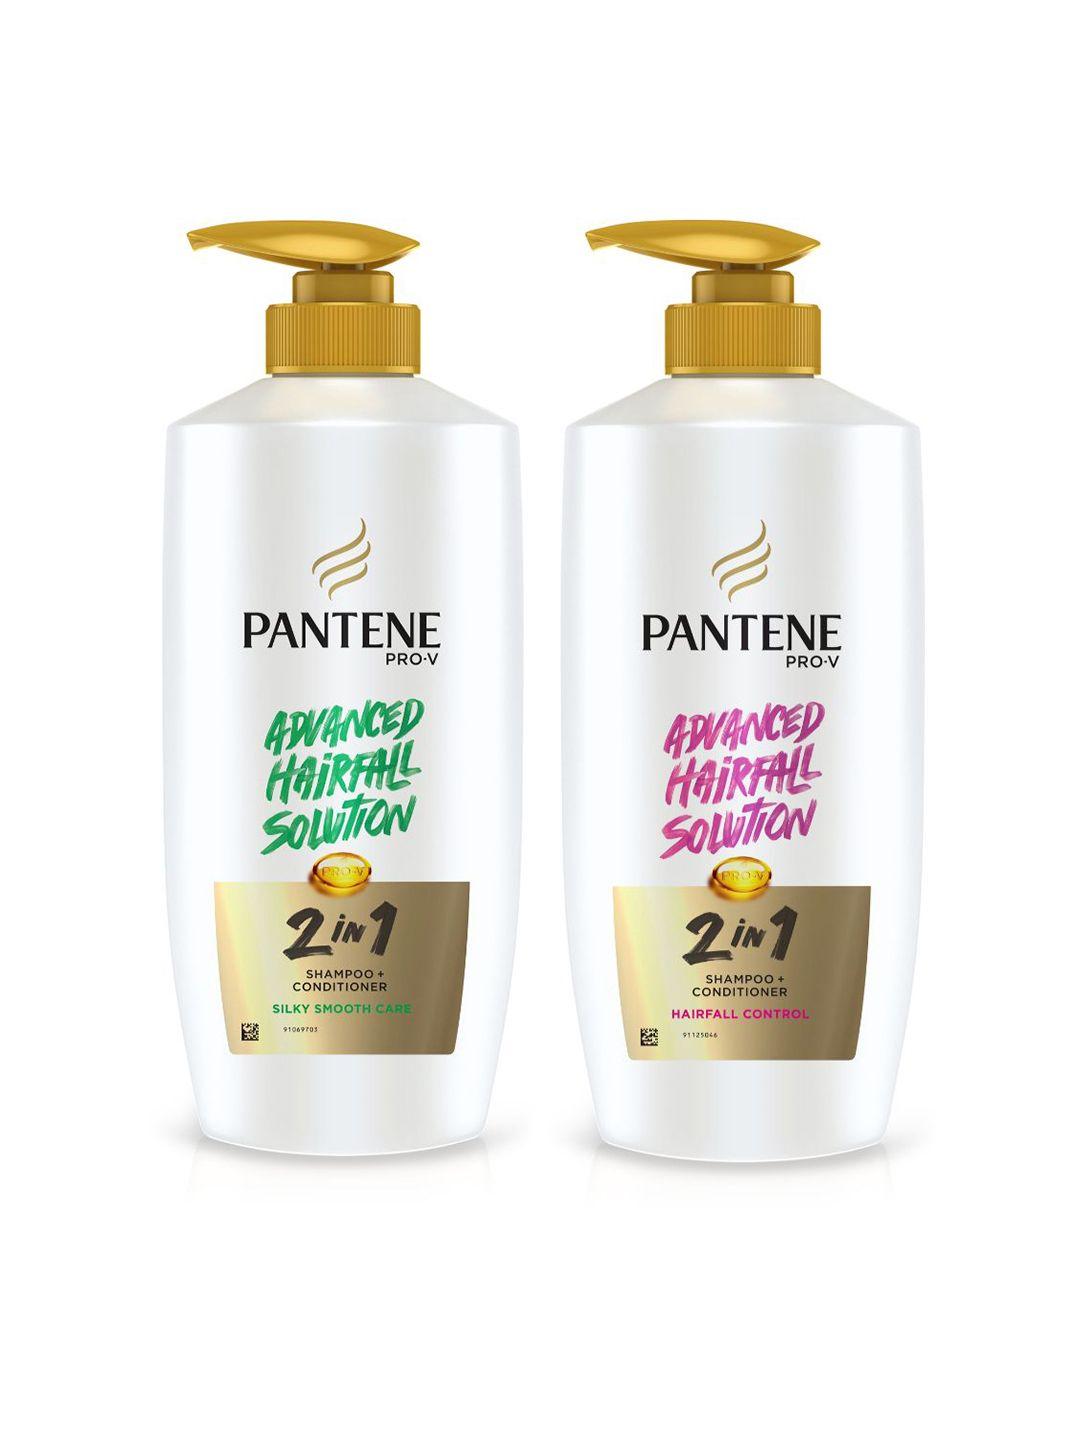 pantene set of 2  advanced hair fall solution 2 in 1 shampoo + conditioner